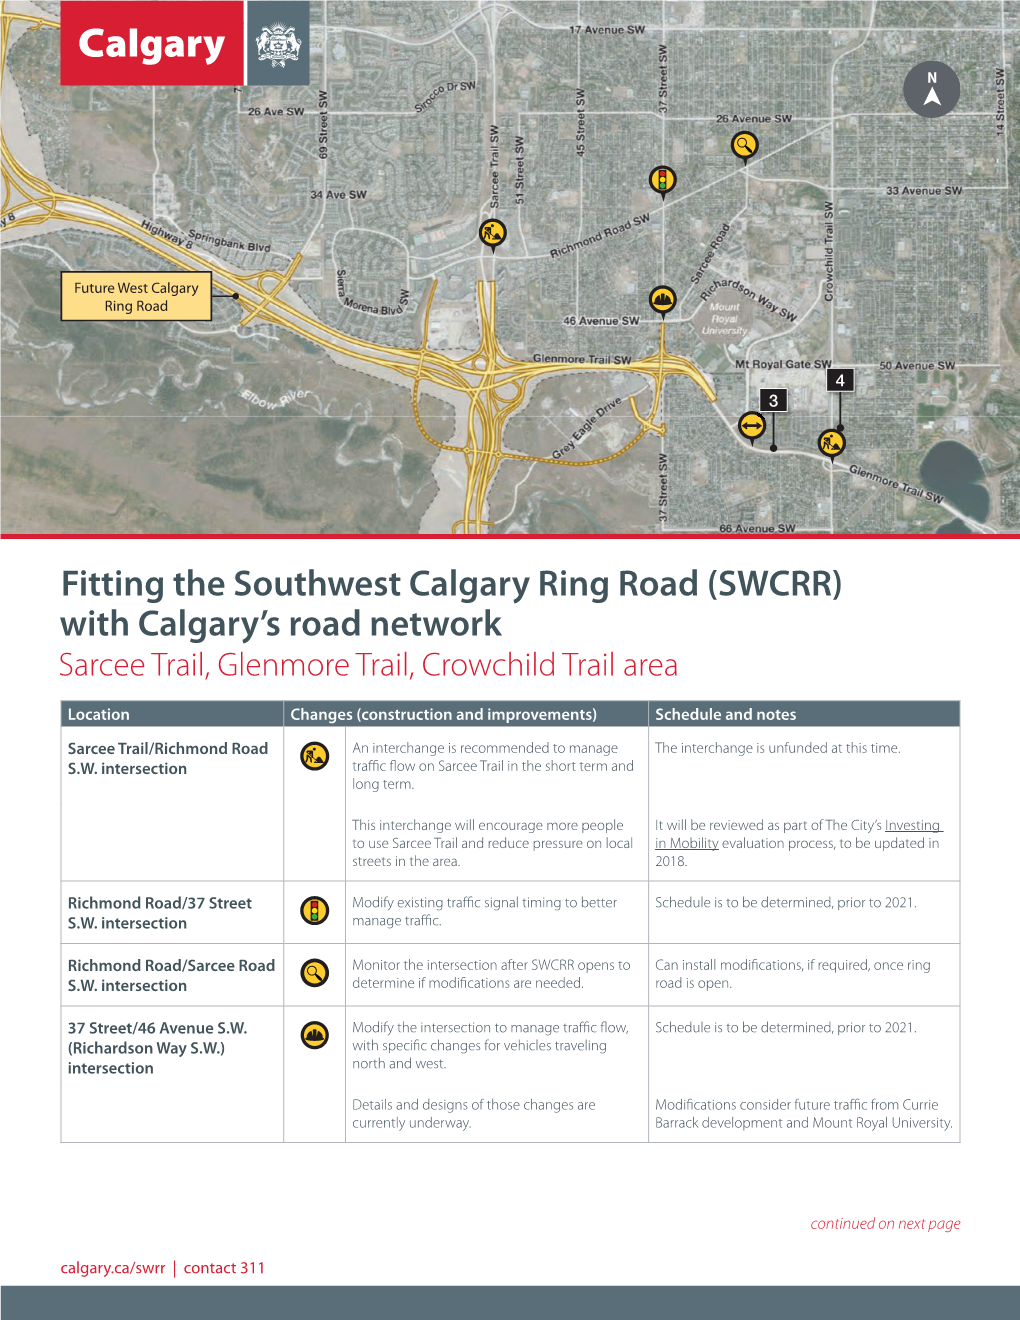 Road Modifications with Sarcee Trail, Glenmore Trail, Crowchild Trail Area